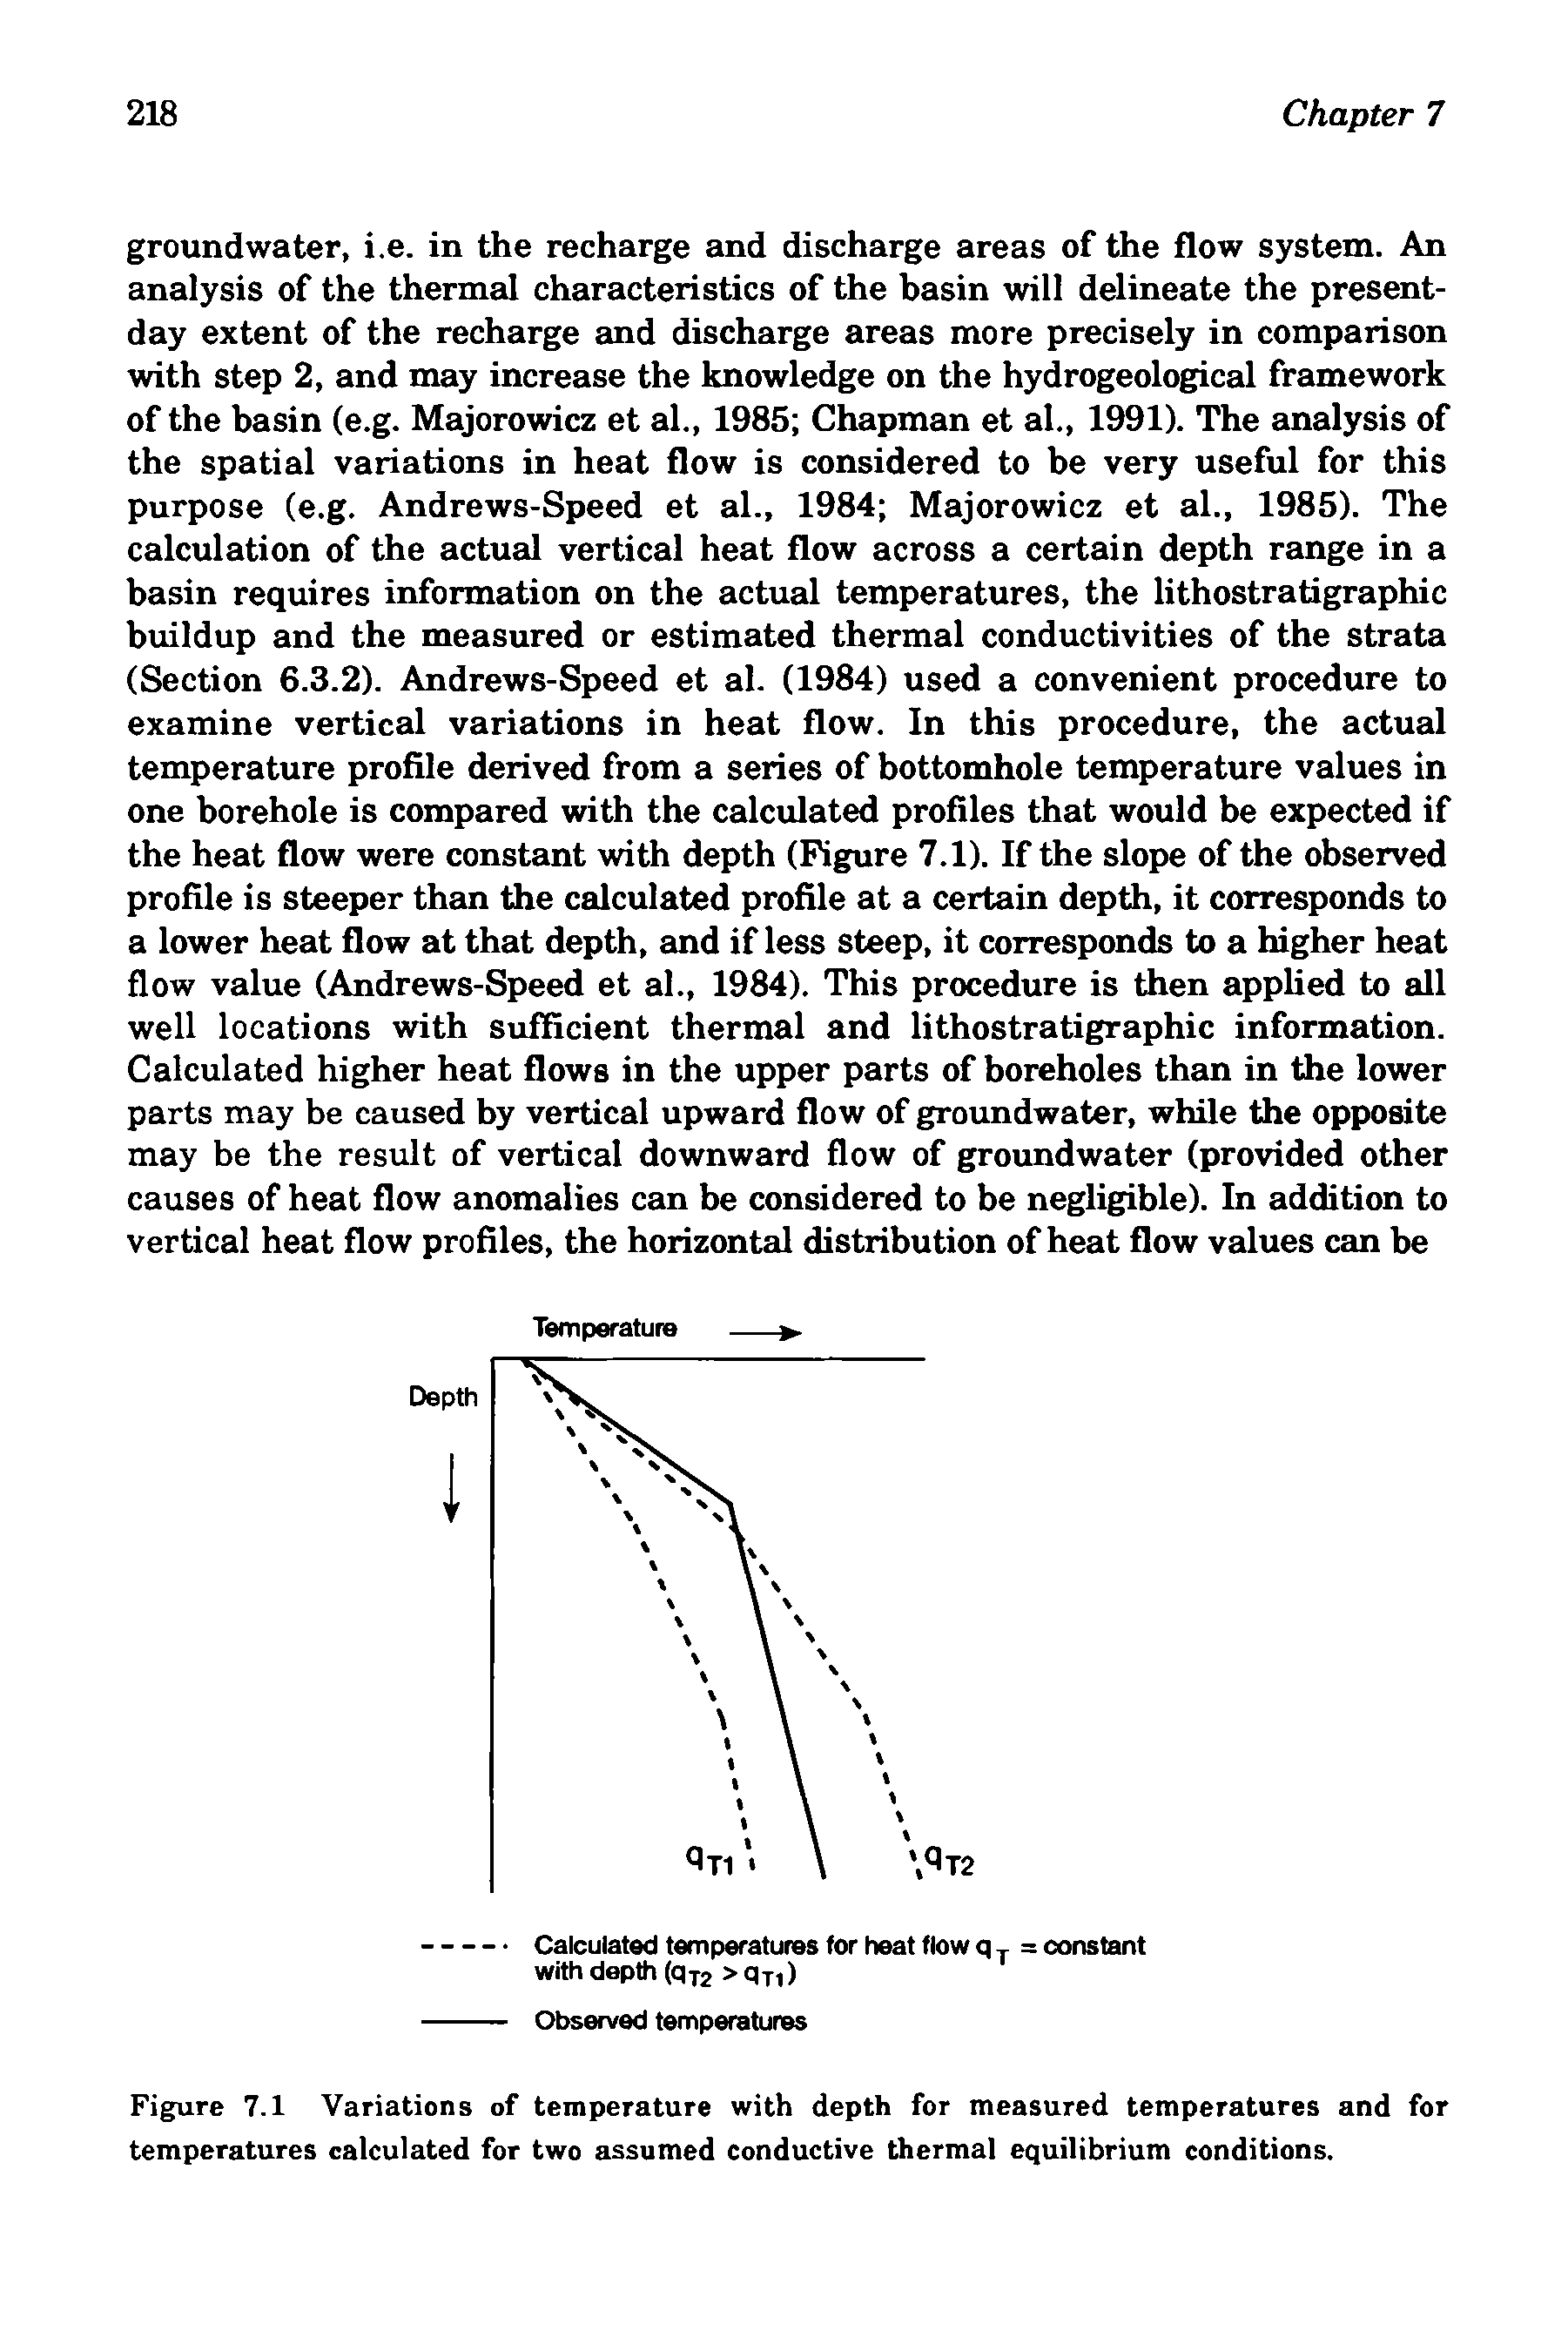 Figure 7.1 Variations of temperature with depth for measured temperatures and for temperatures calculated for two assumed conductive thermal equilibrium conditions.